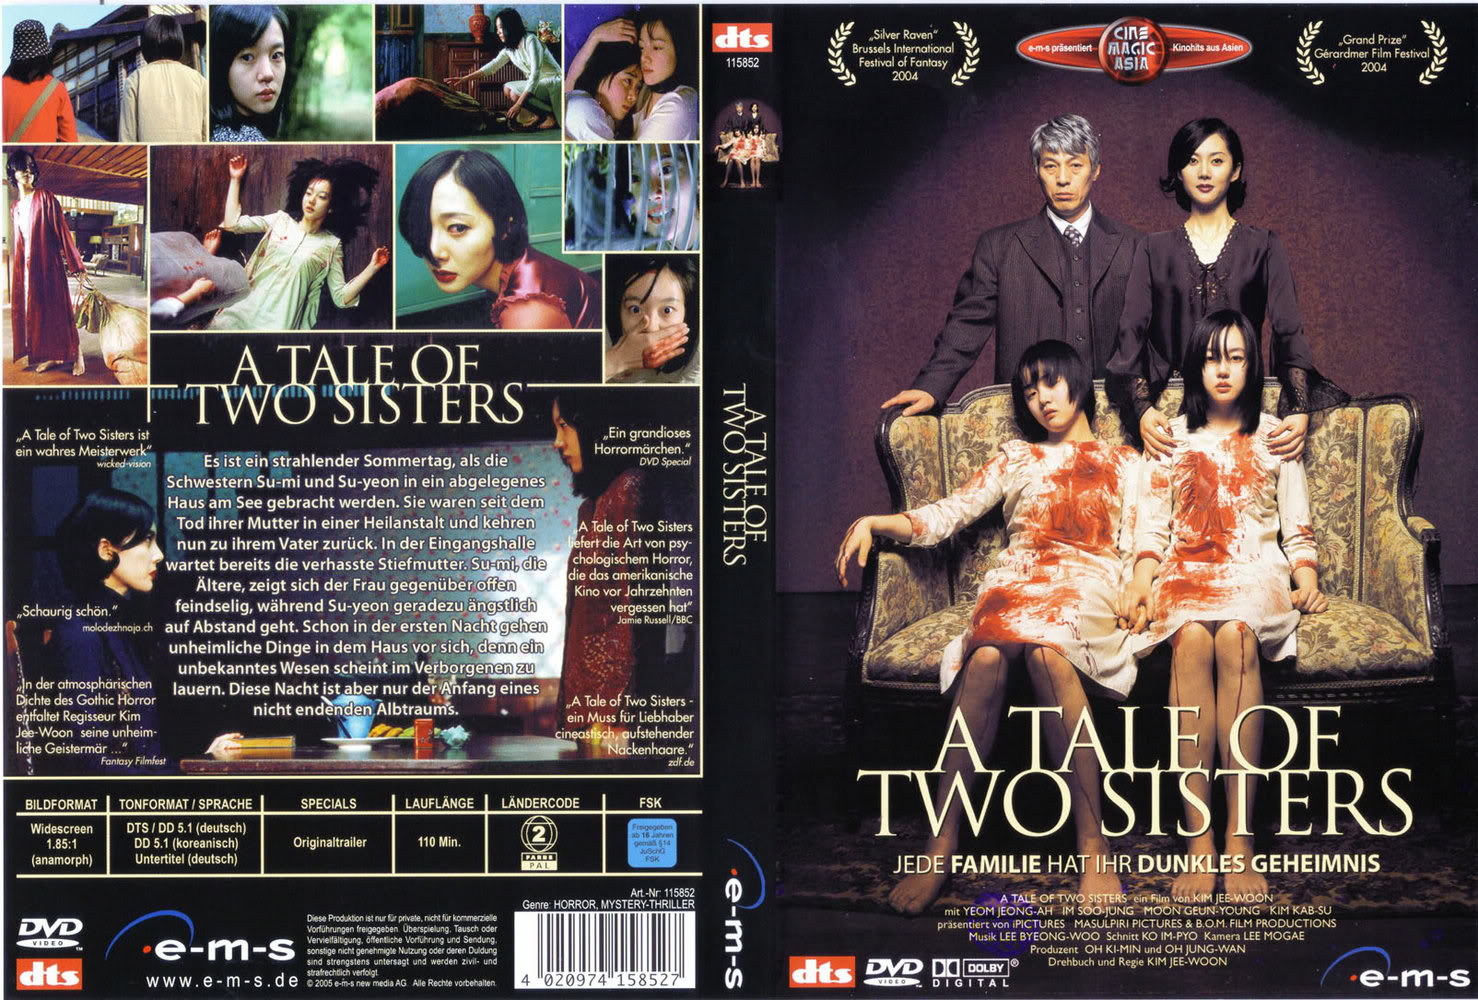 Sister tale. Tale of two sisters Постер. "A Tale of two sisters" (South Korea, 2003). Chantelise – a Tale of two sisters. Twin Quest -the Tale of two sisters-.